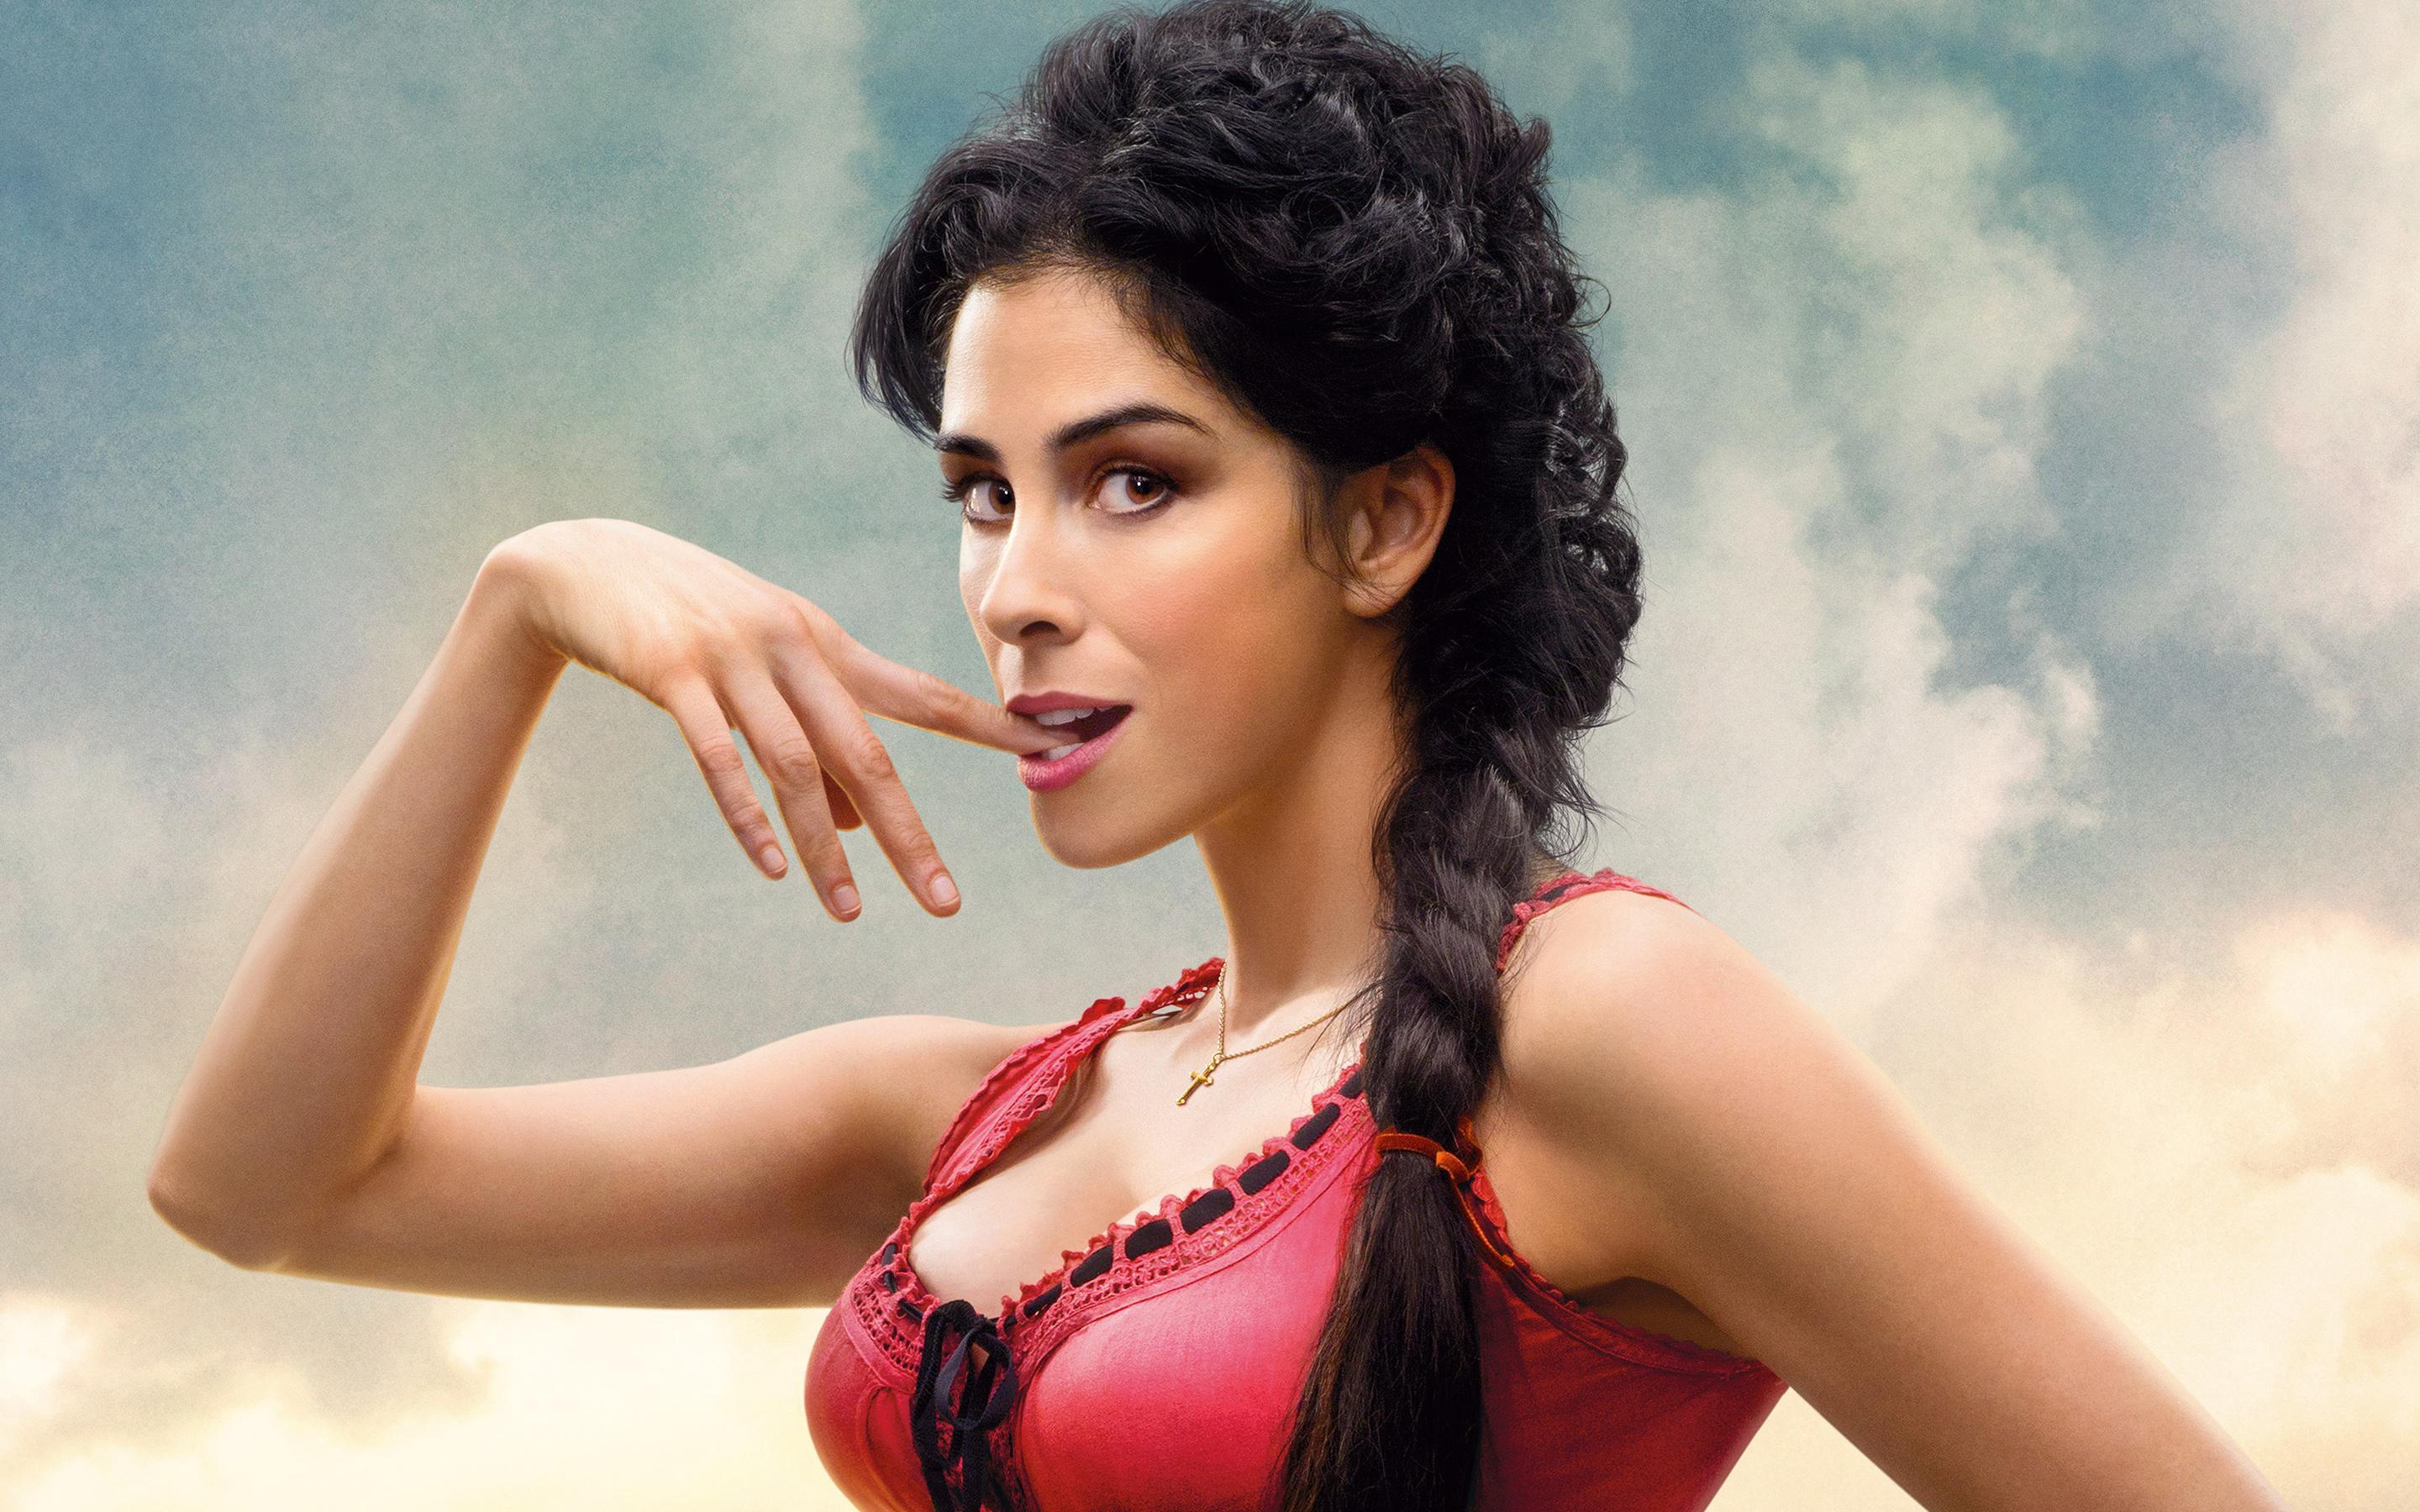 Sarah Silverman Wallpaper High Resolution and Quality Download